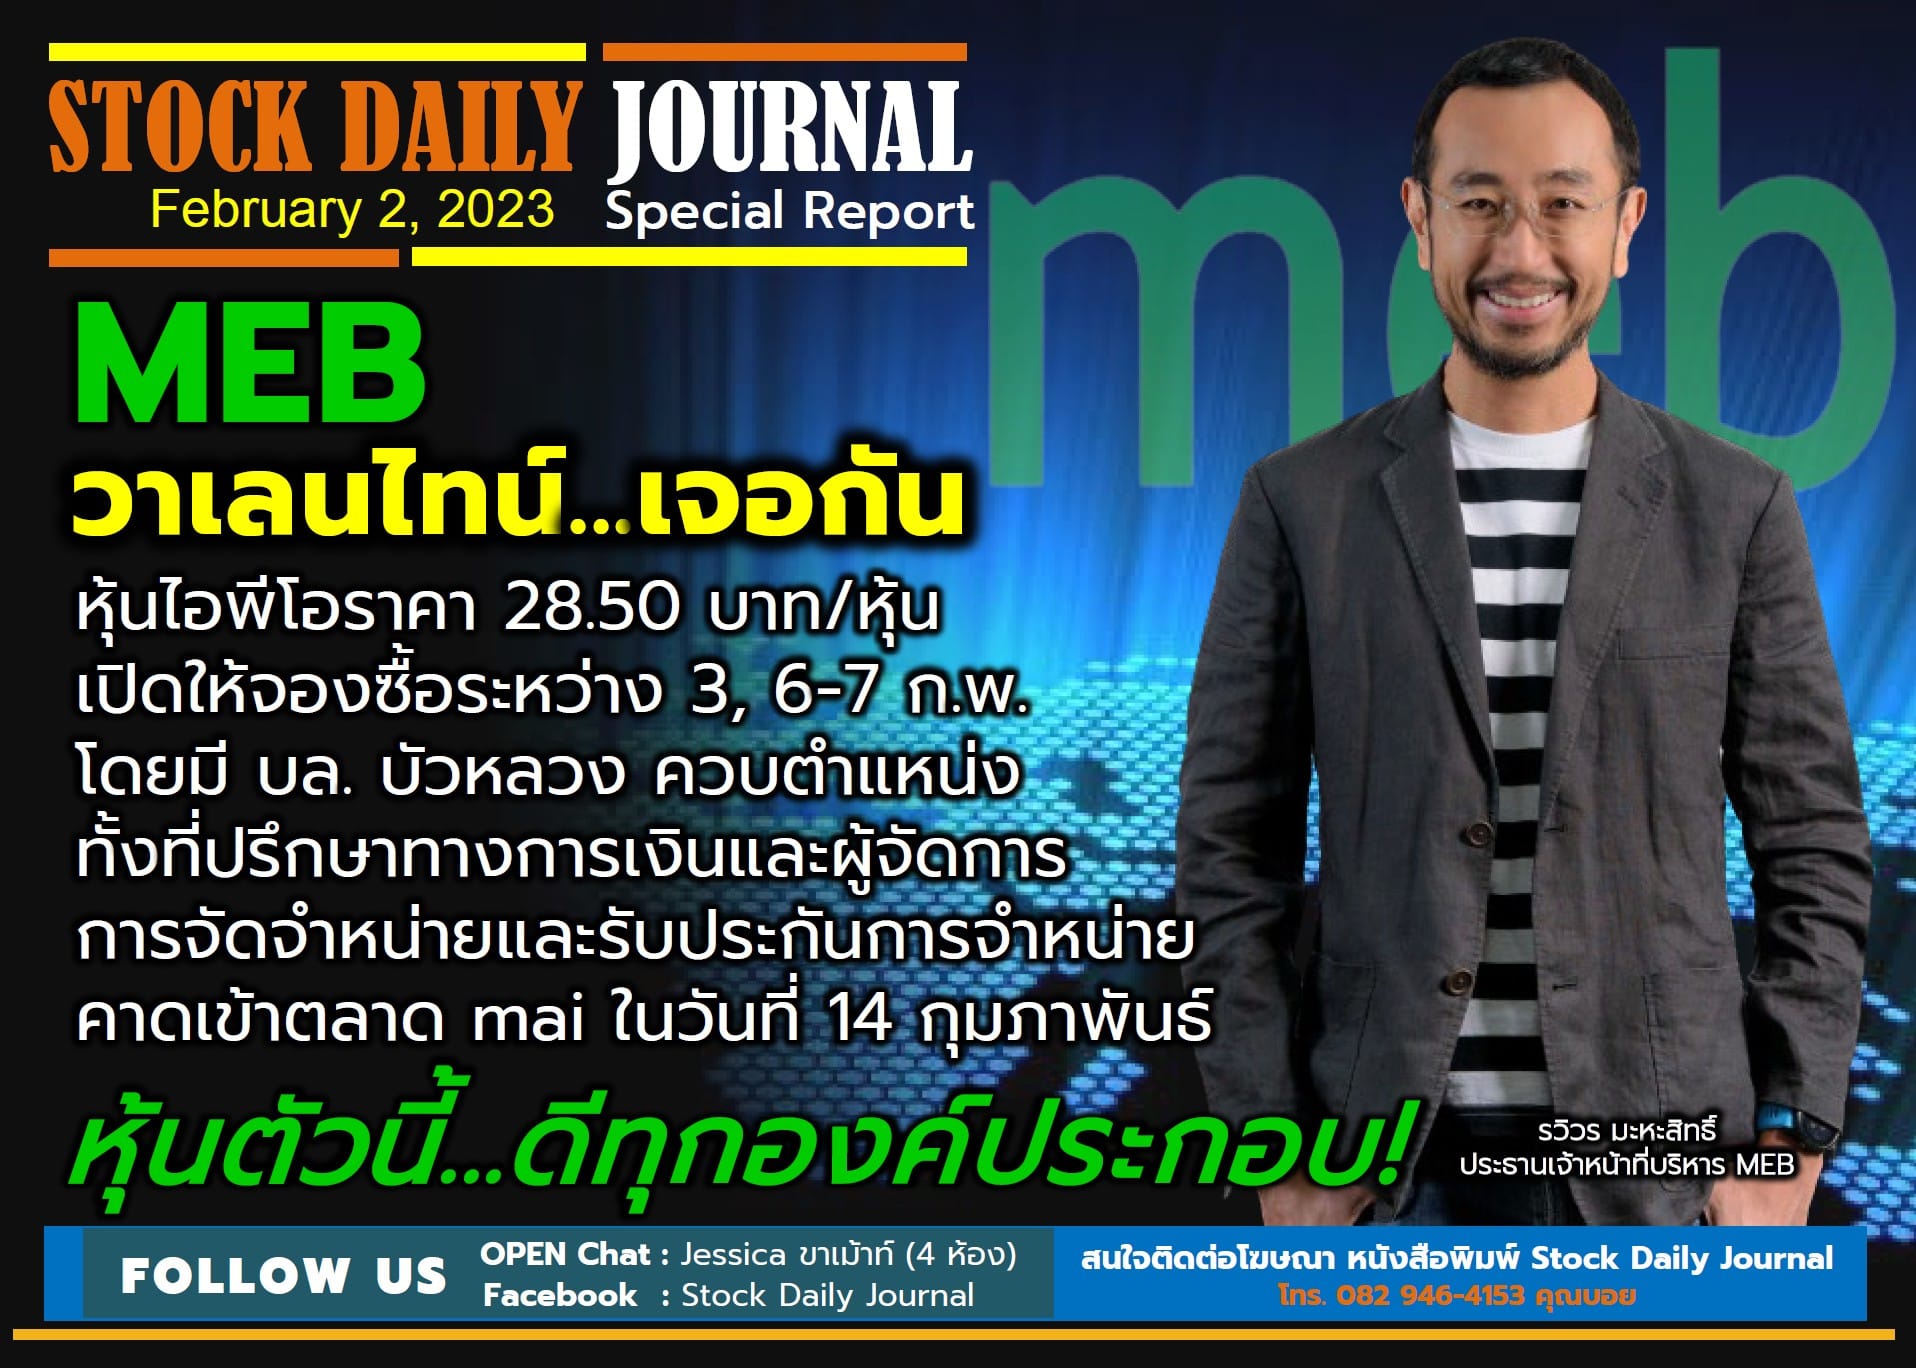 STOCK DAILY JOURNAL “Special Report : MEB”